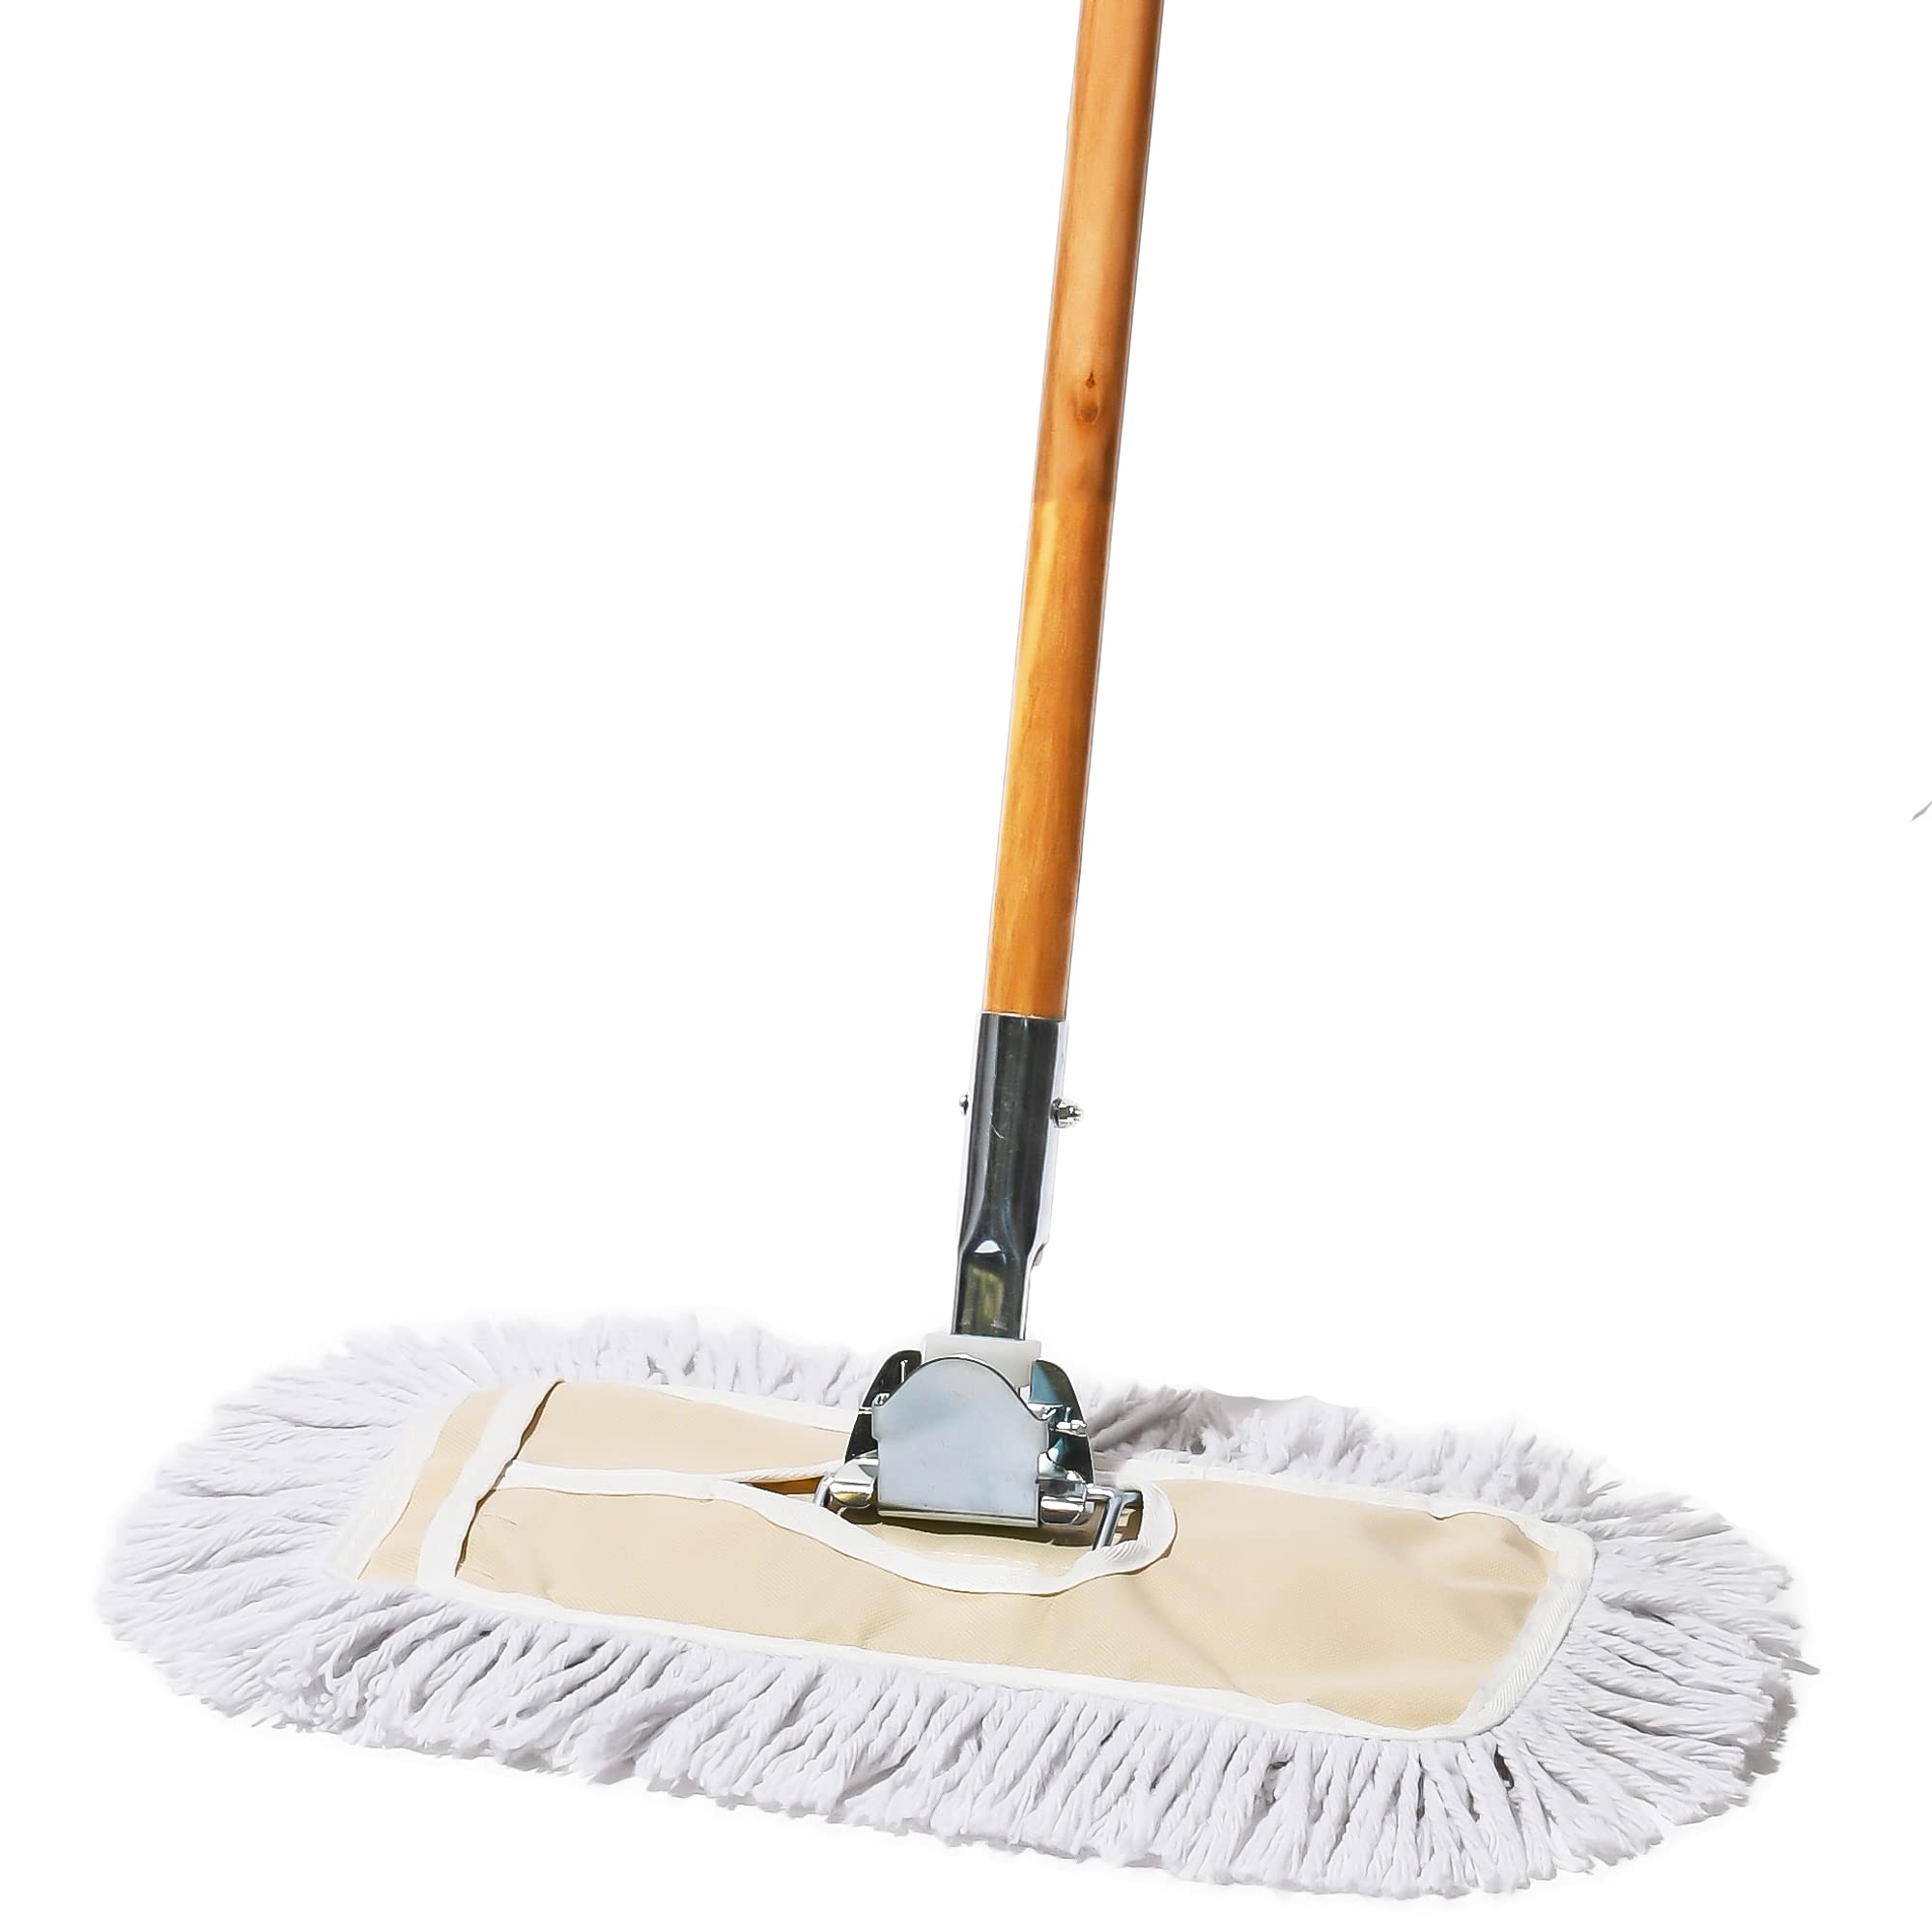 1 Tidy Tools Cotton Floor Mop - Dust Mop For Dry Wet Cleaning